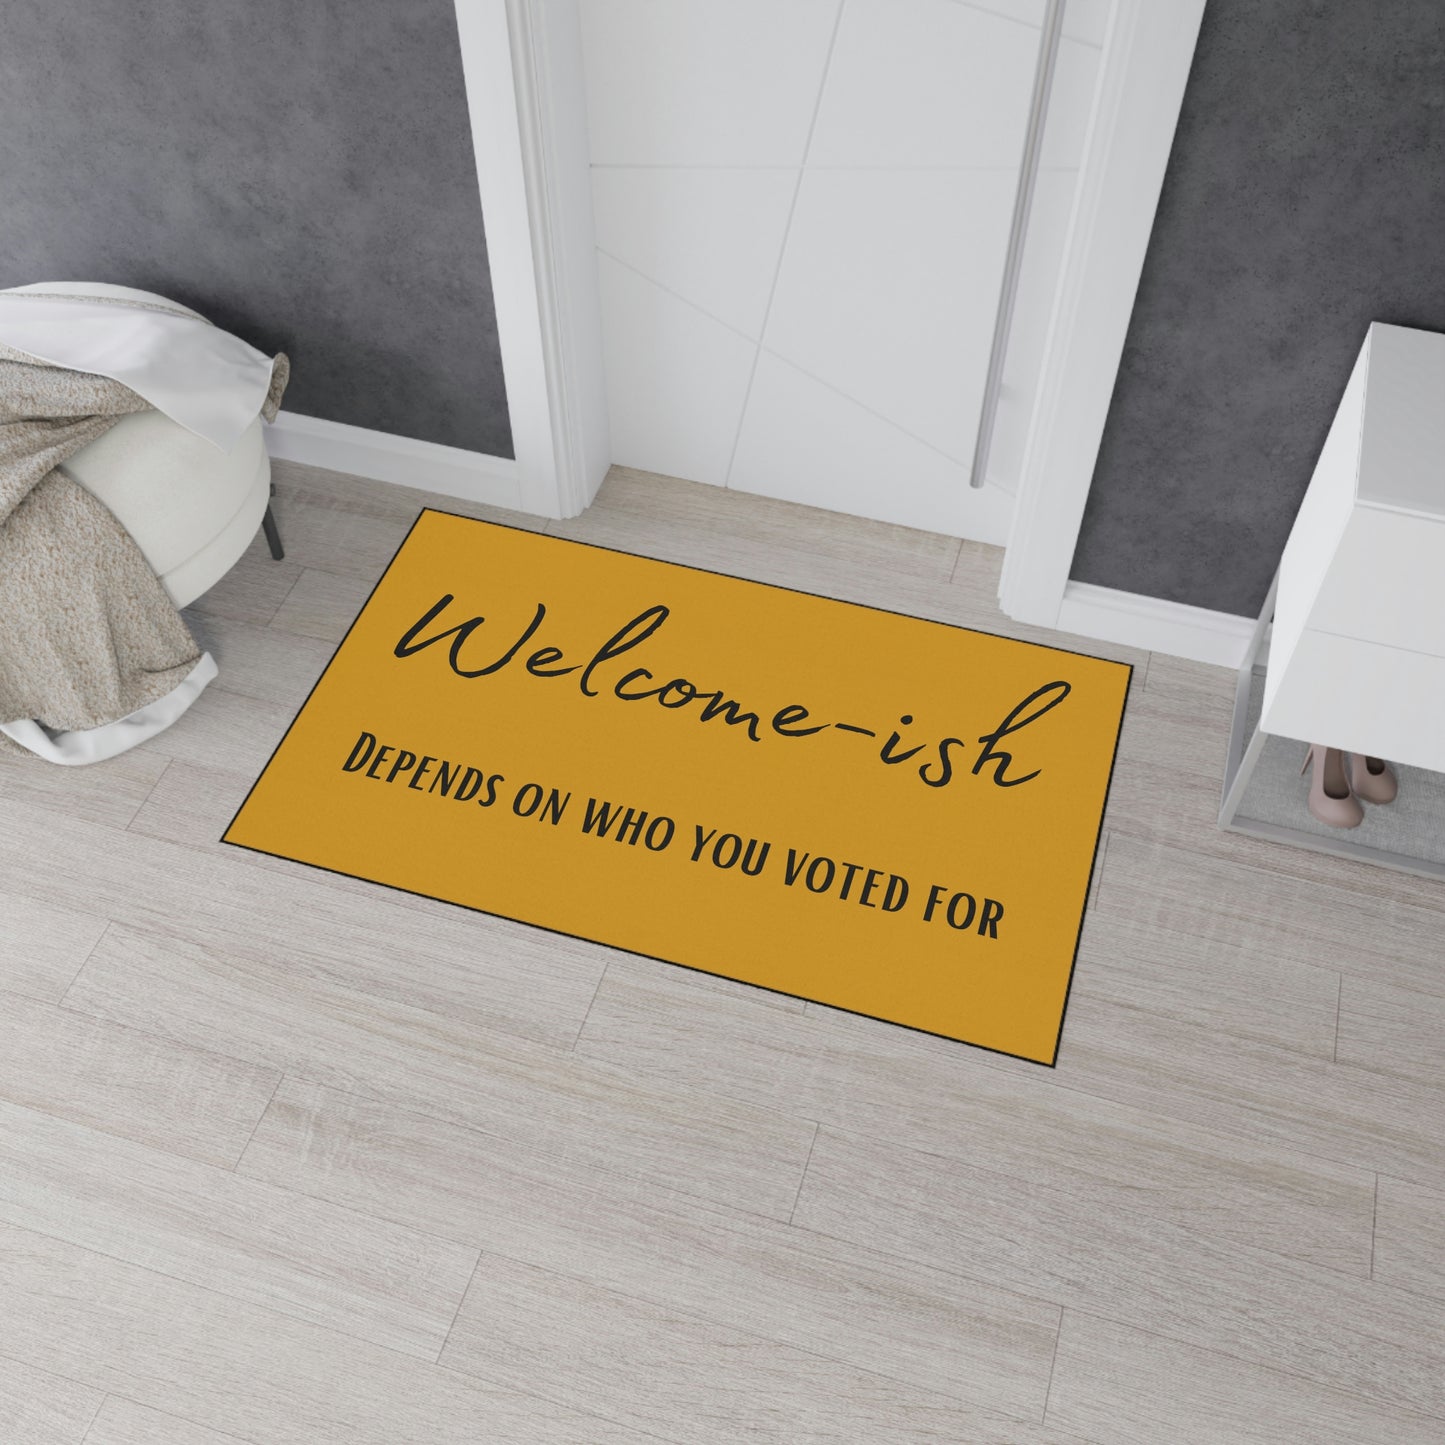 Light-hearted political satire welcome mat for homes